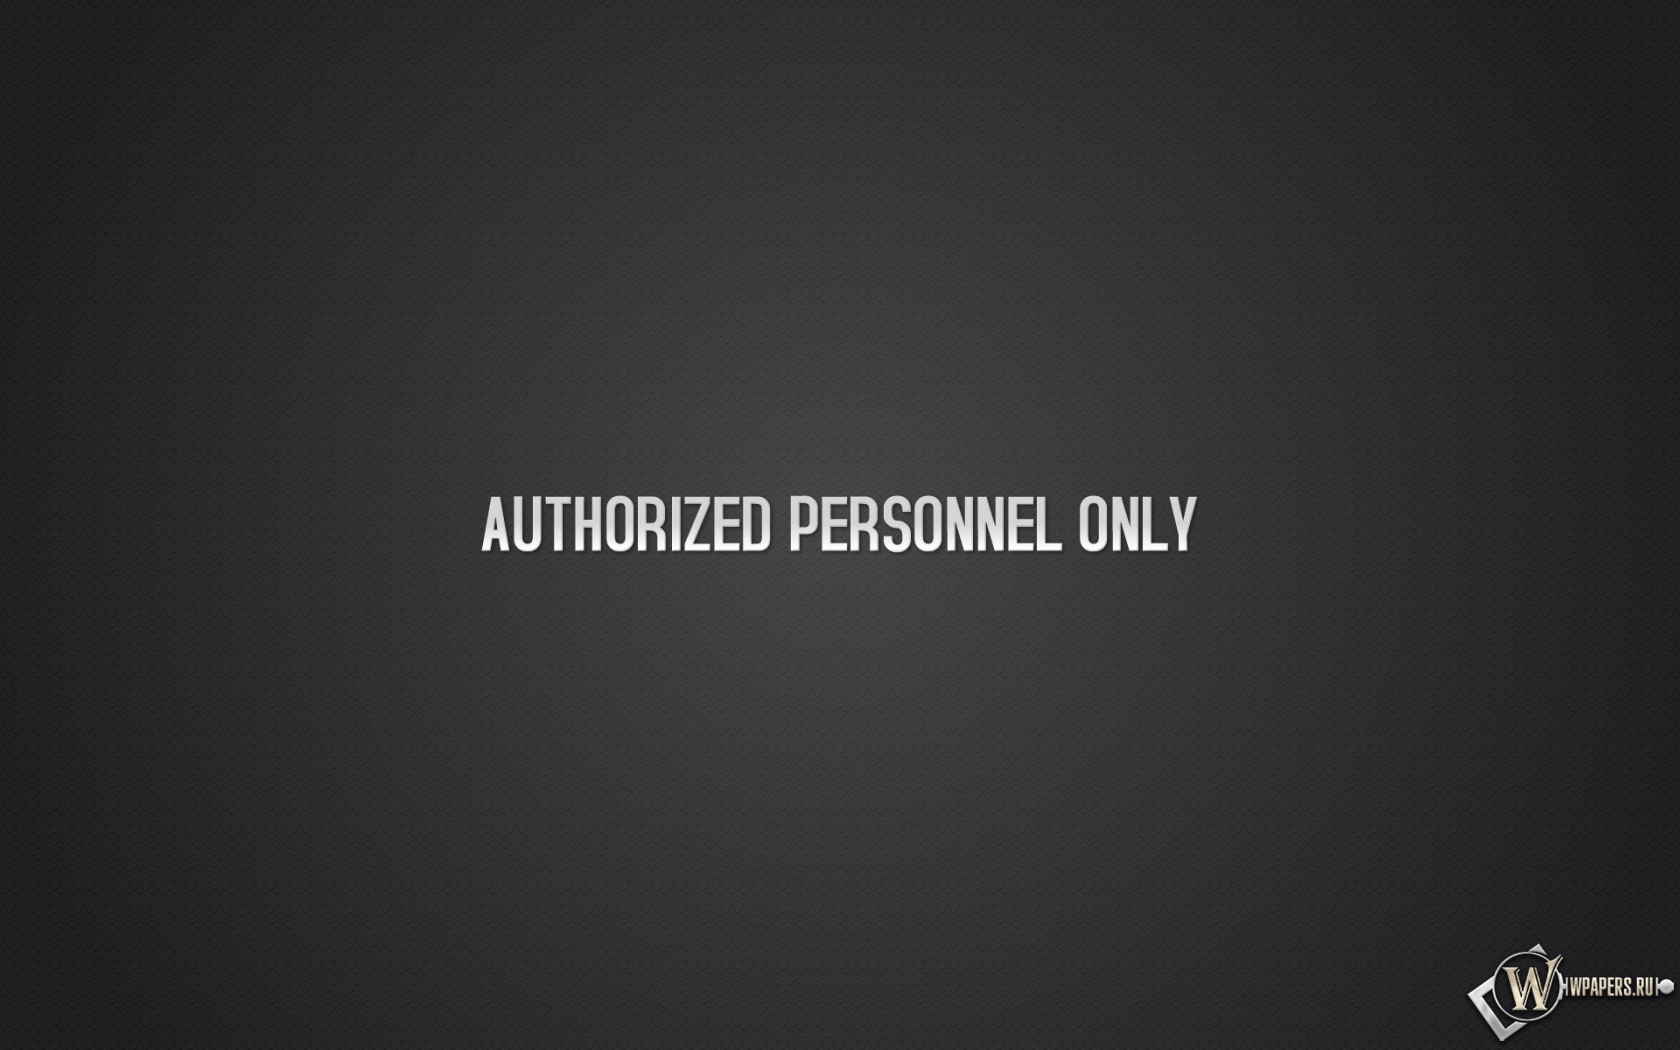 Authorized personnel only 1680x1050